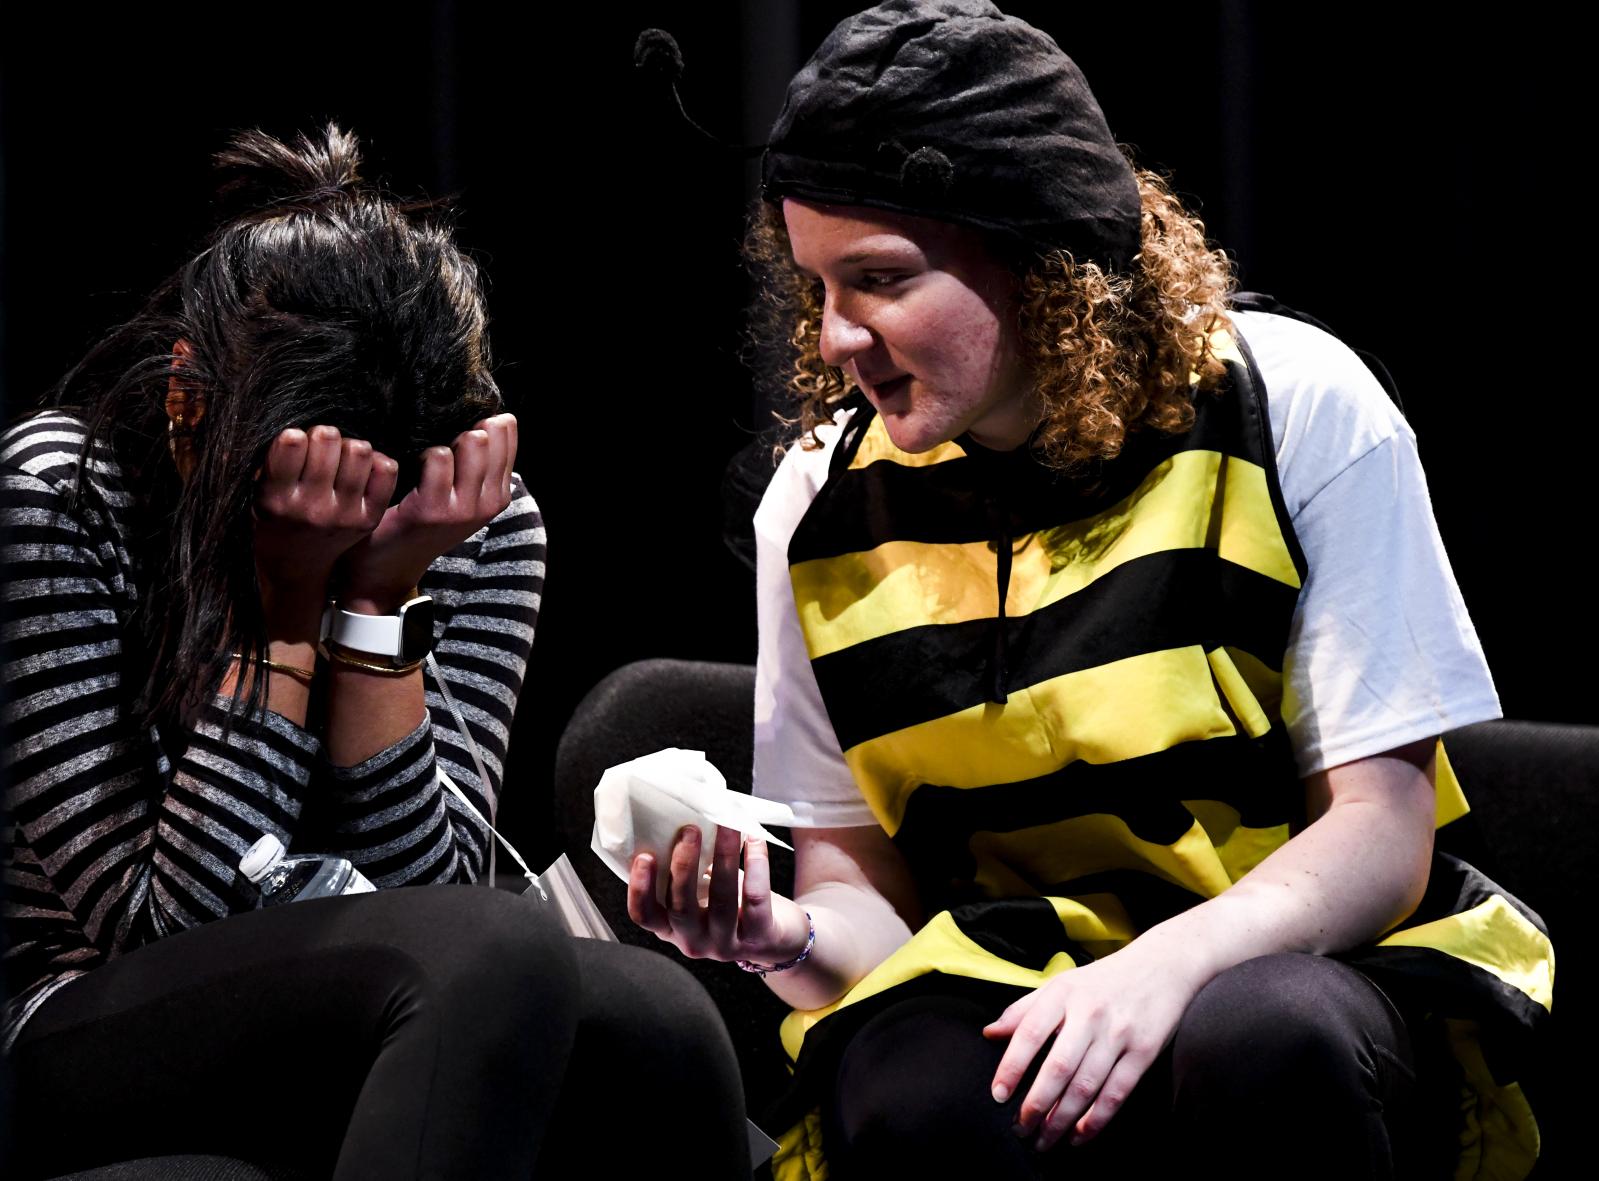 University of Missouri senior Ellen Goodrich, right, offers a tissue to Shreeyanka Bardhan on March 10, 2020, at Jesse Hall in Columbia, Missouri. Bardhan was the first to get out at the Missouri Regional Spelling Bee by misspelling the word &lsquo;infant.&rsquo;